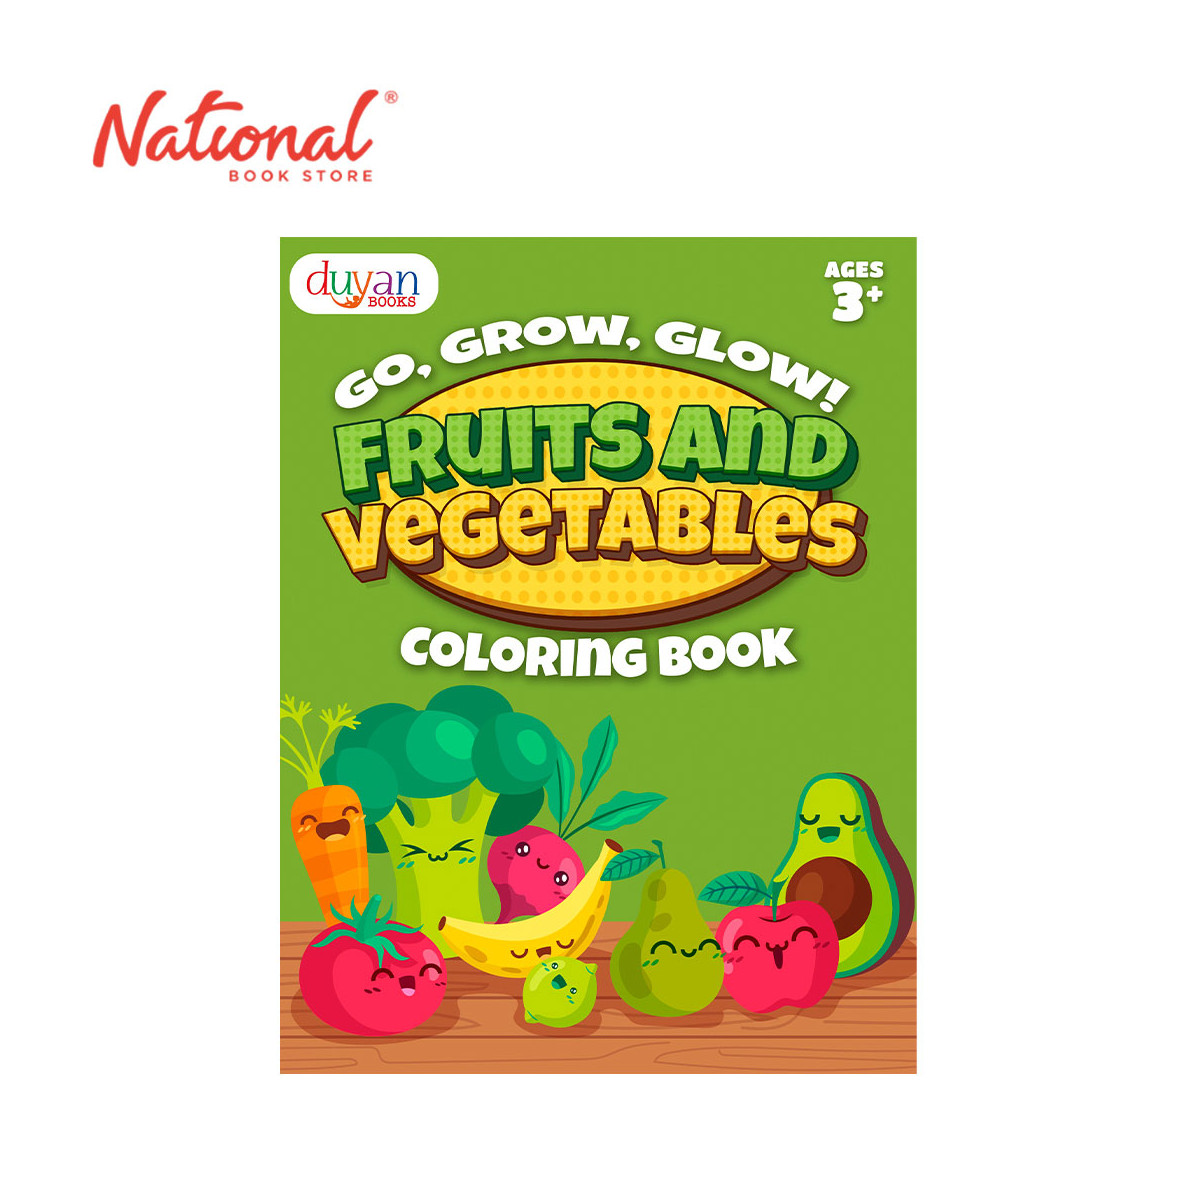 Fruits And Vegetables Coloring Book - Trade Paperback - Activity Books for Kids